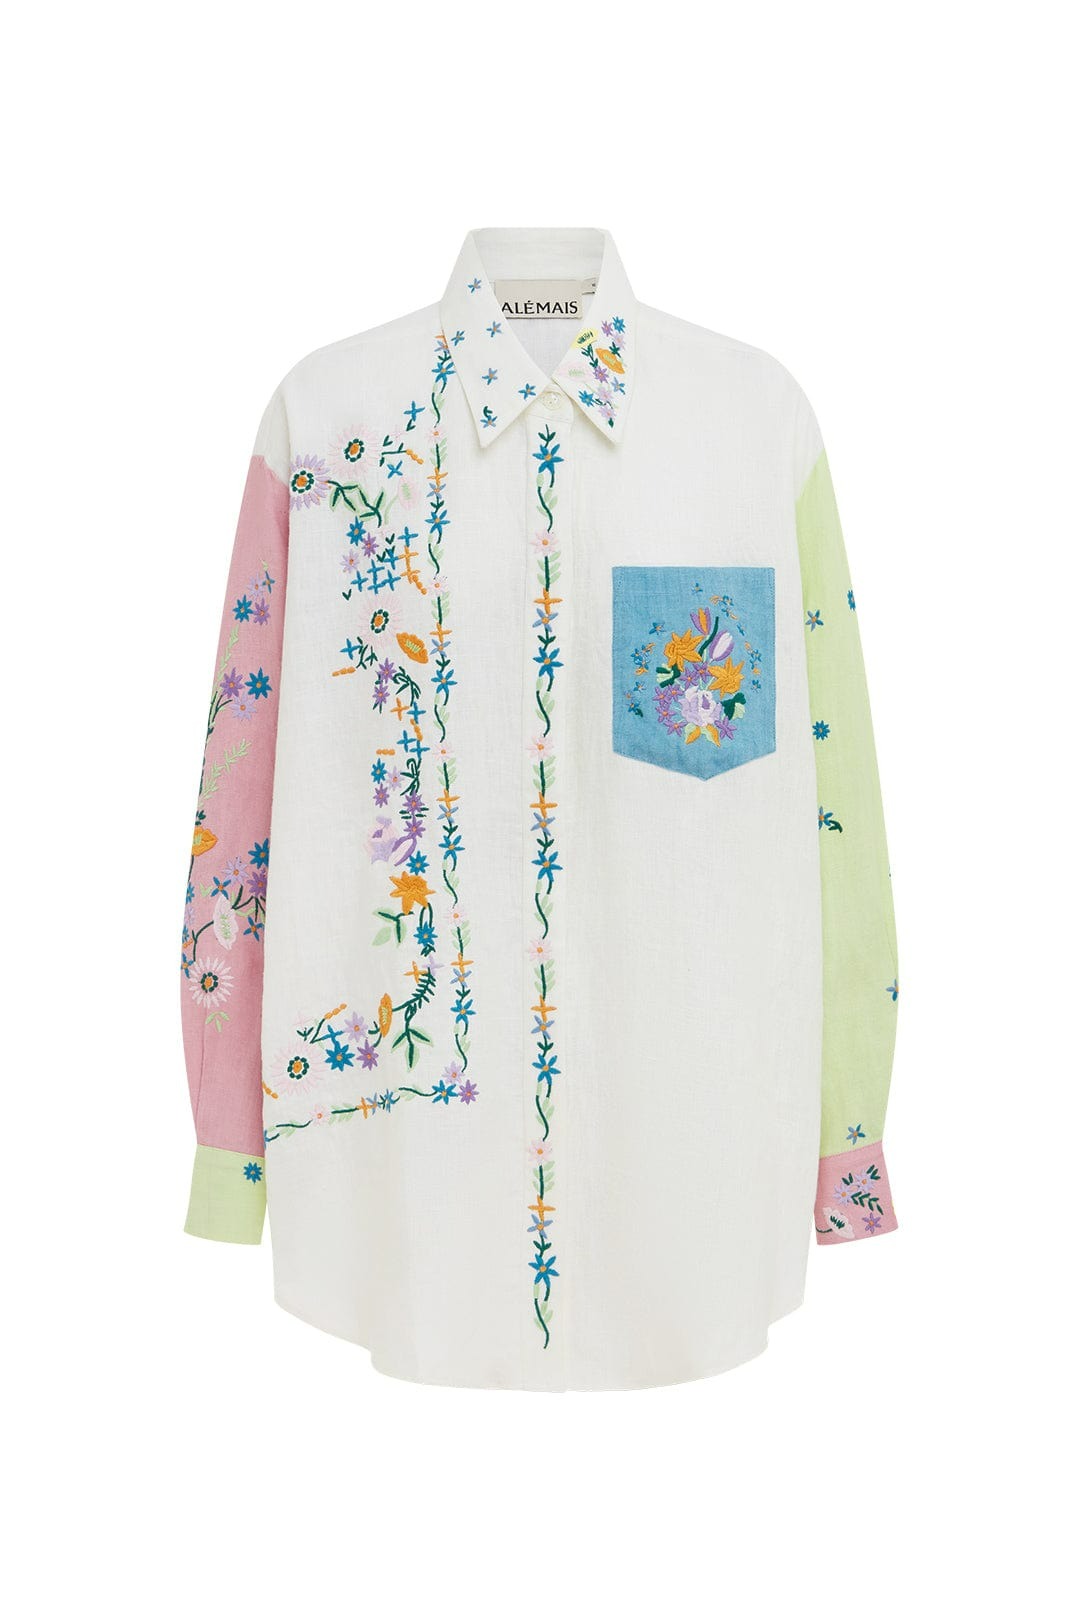 Alemais Willa Embroidered Shirt-0